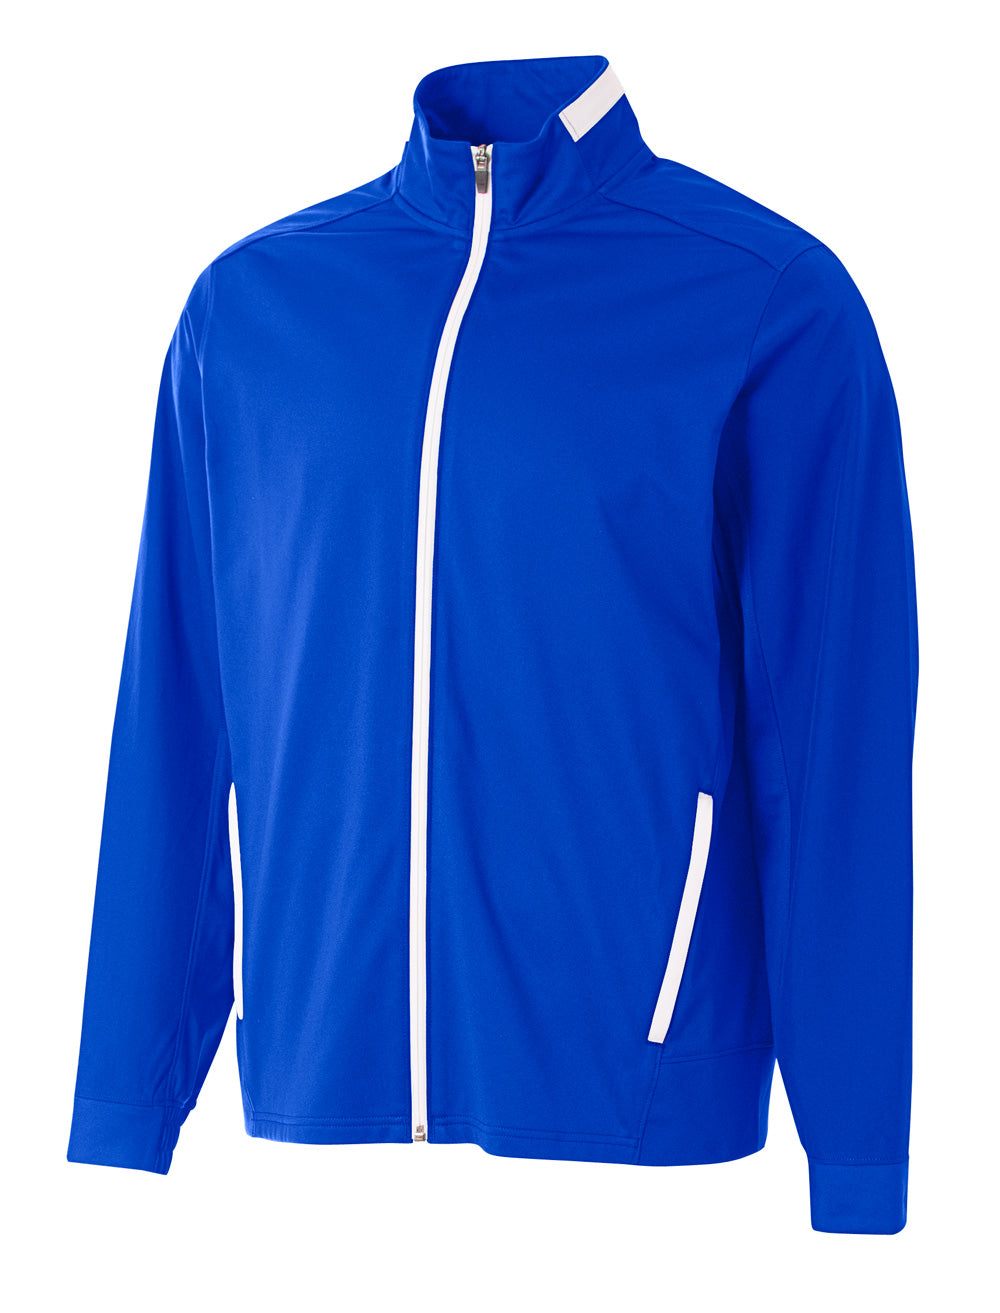 Royal/white A4 A4 Youth League Full Zip Warm Up Jacket